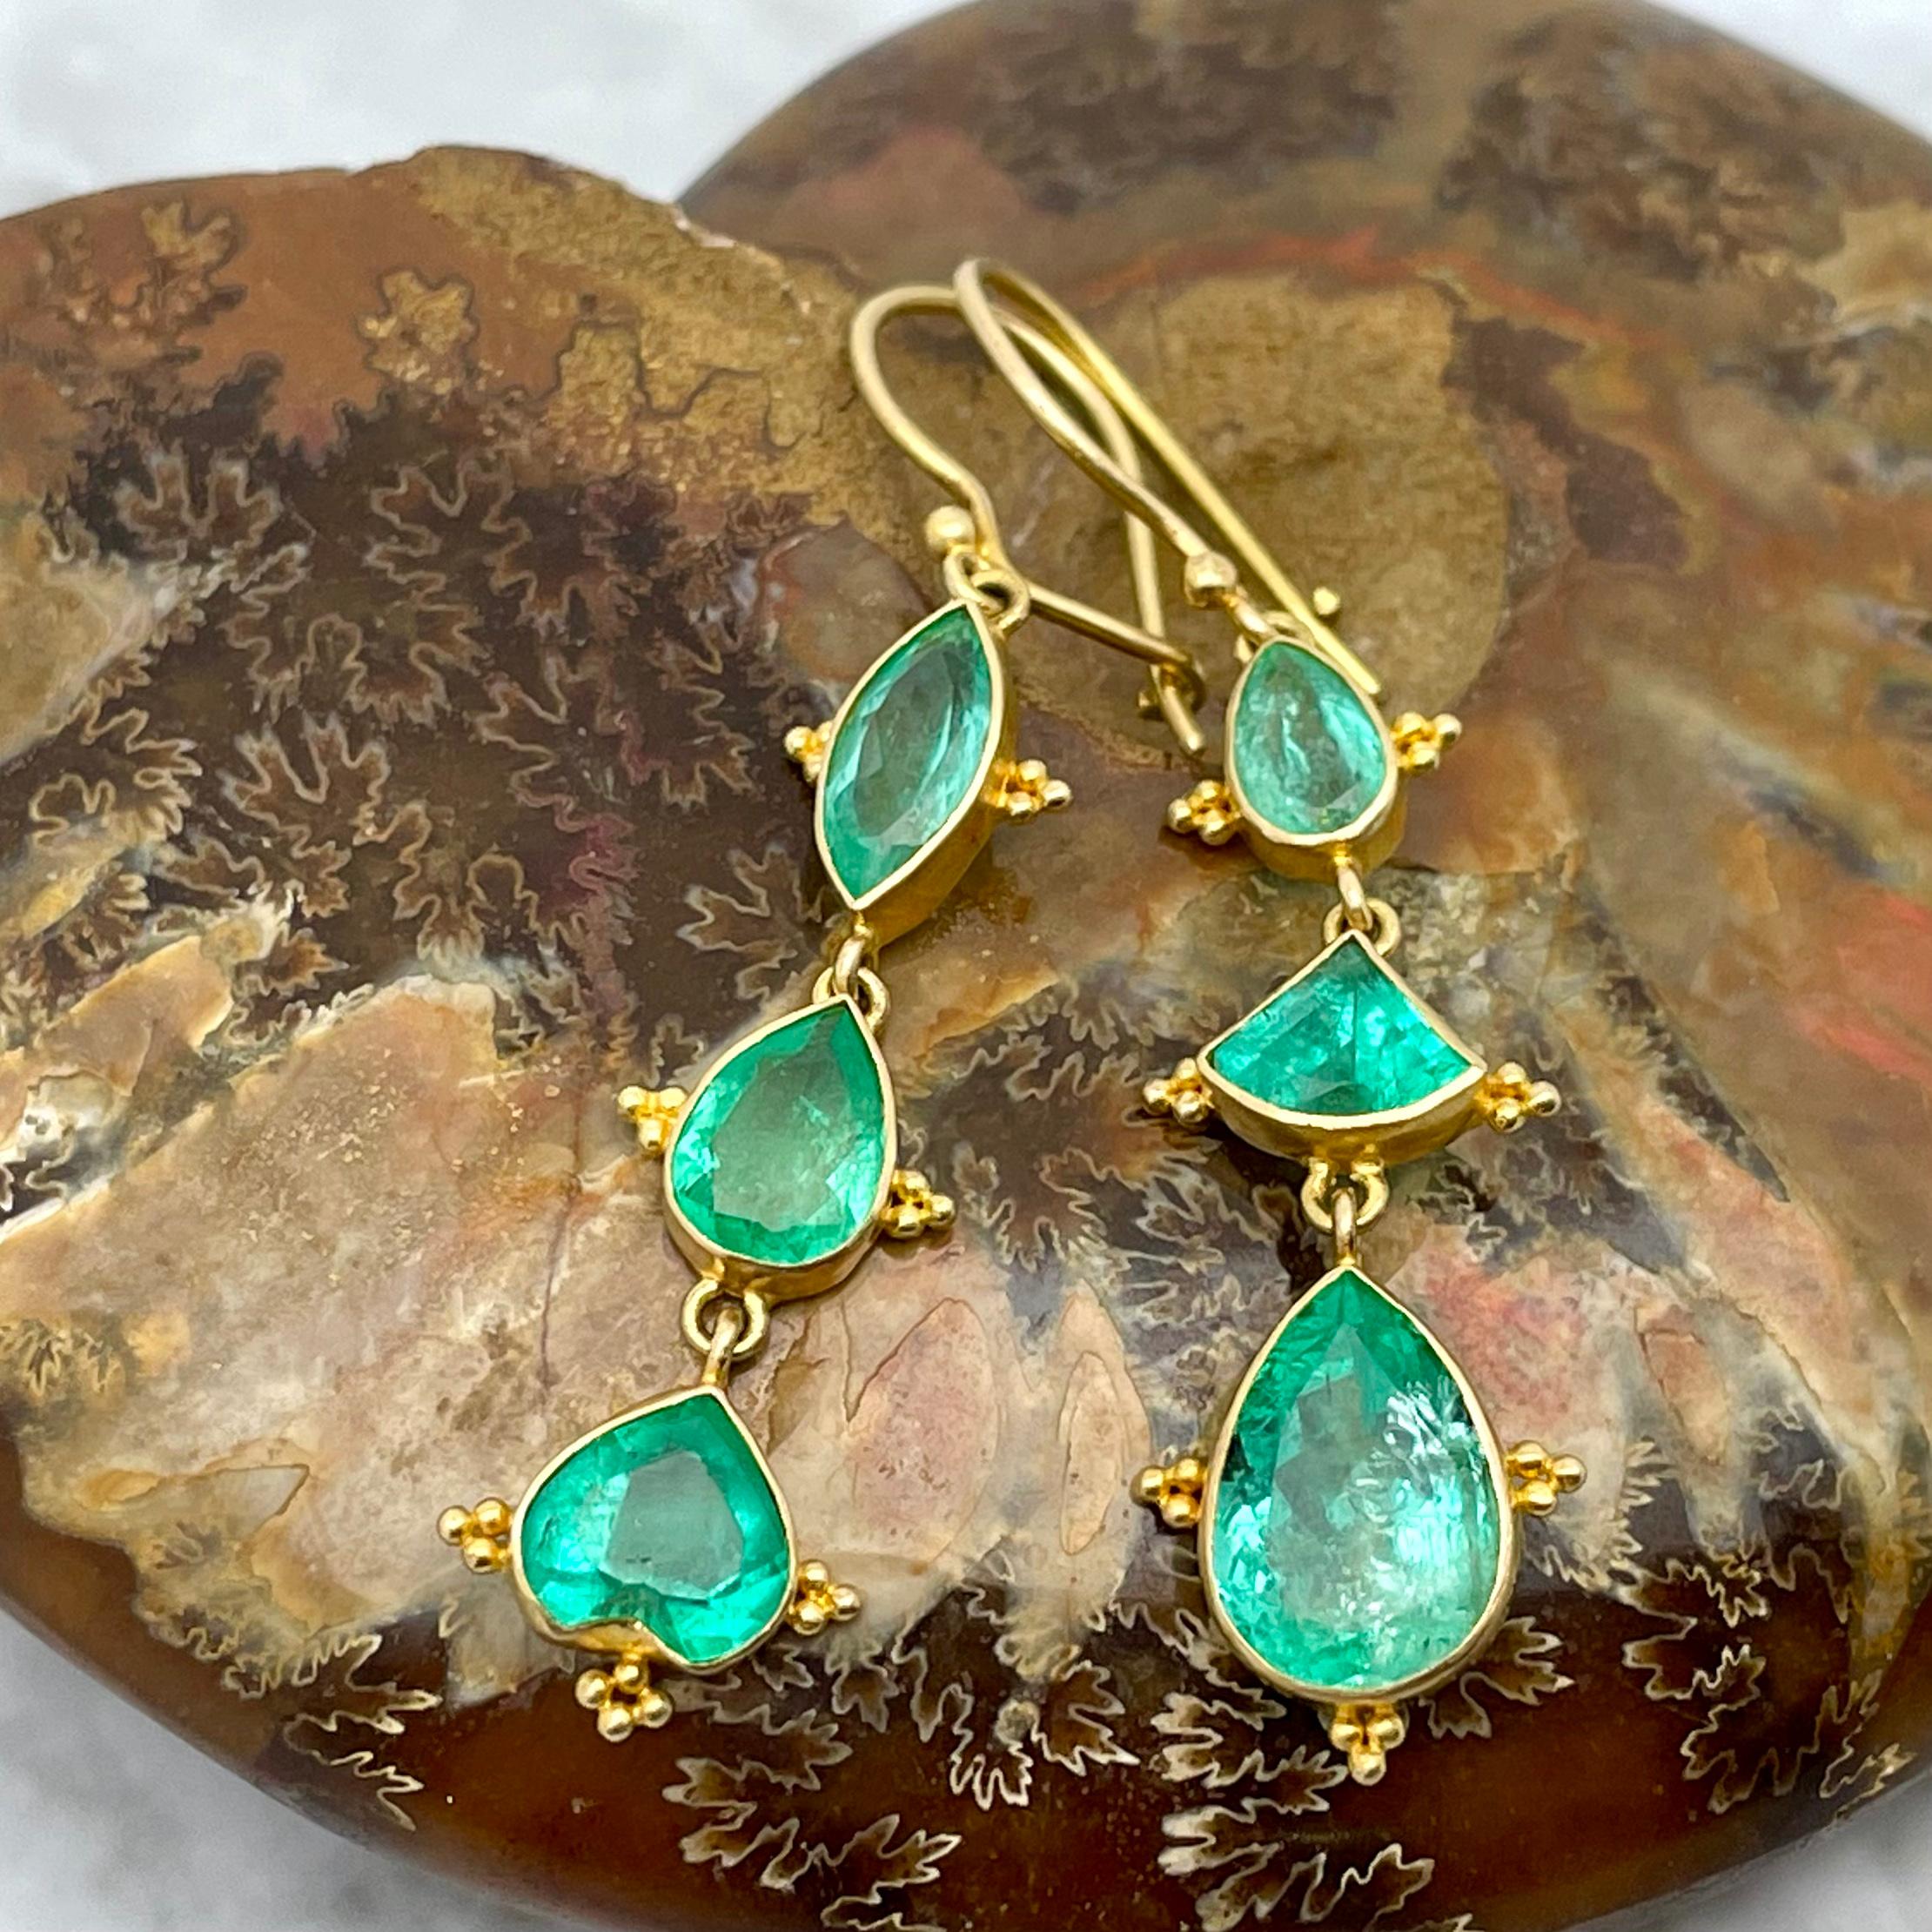 Six uniquely shaped light transparent green faceted Columbian emeralds from 5 x 7 mm to 8 x 11 mm in size are combined to create these one of a kind earrings.  Small gold 